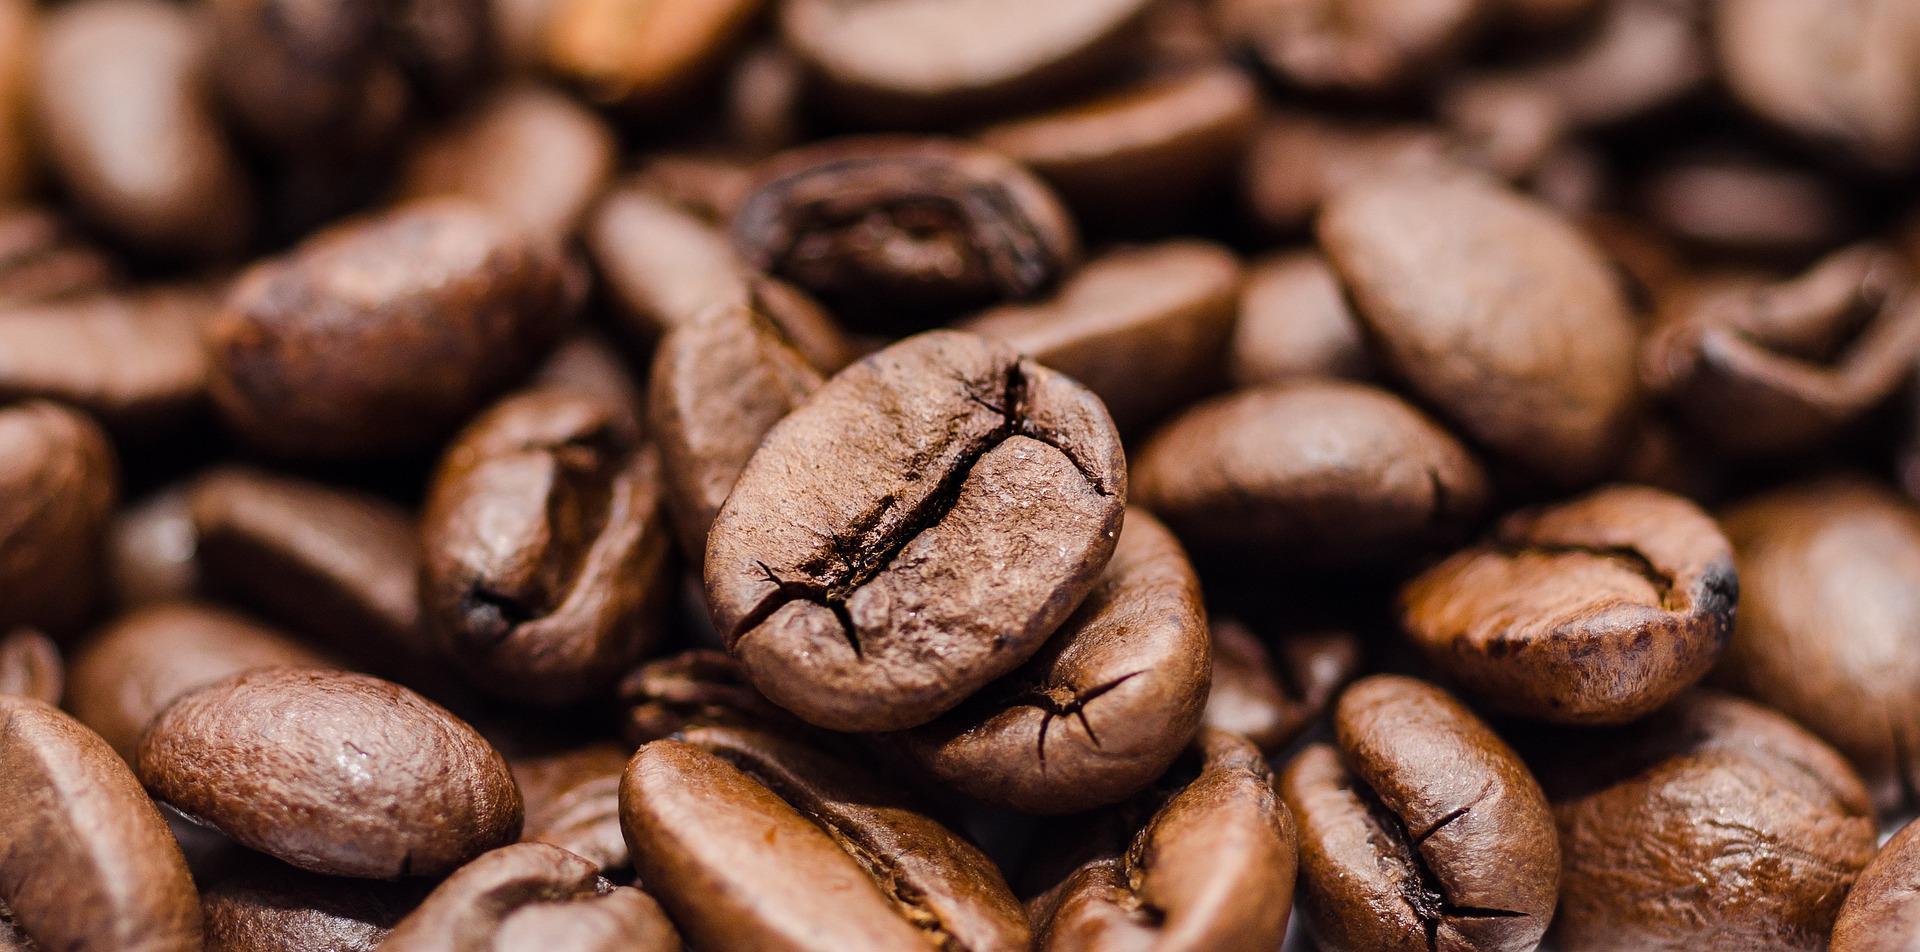 8 Coffee Benefits And Side Effects